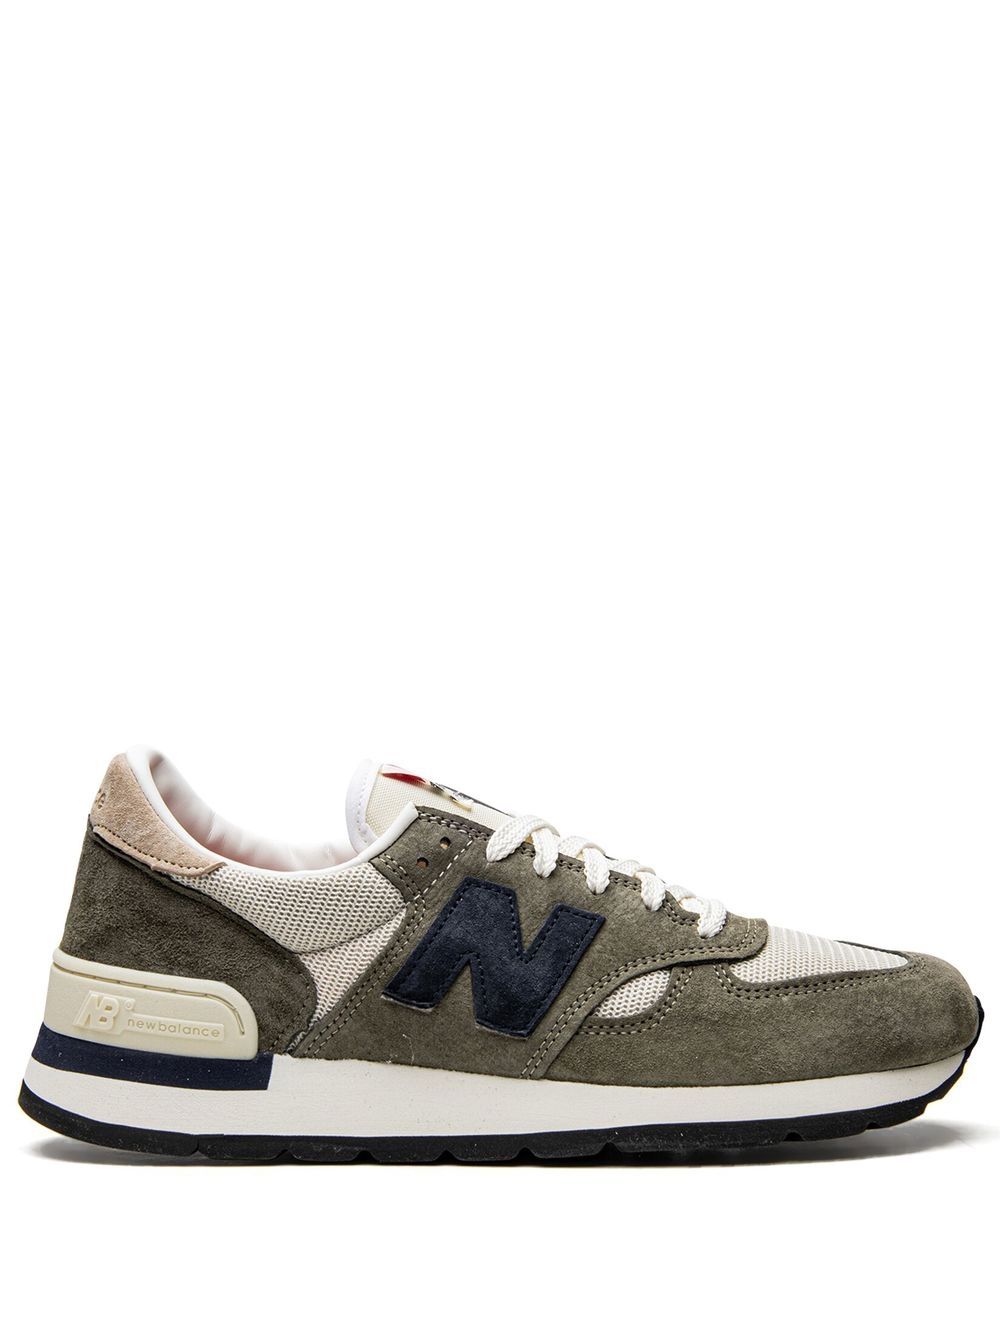 New Balance MADE in USA 990 low-top sneakers - Green